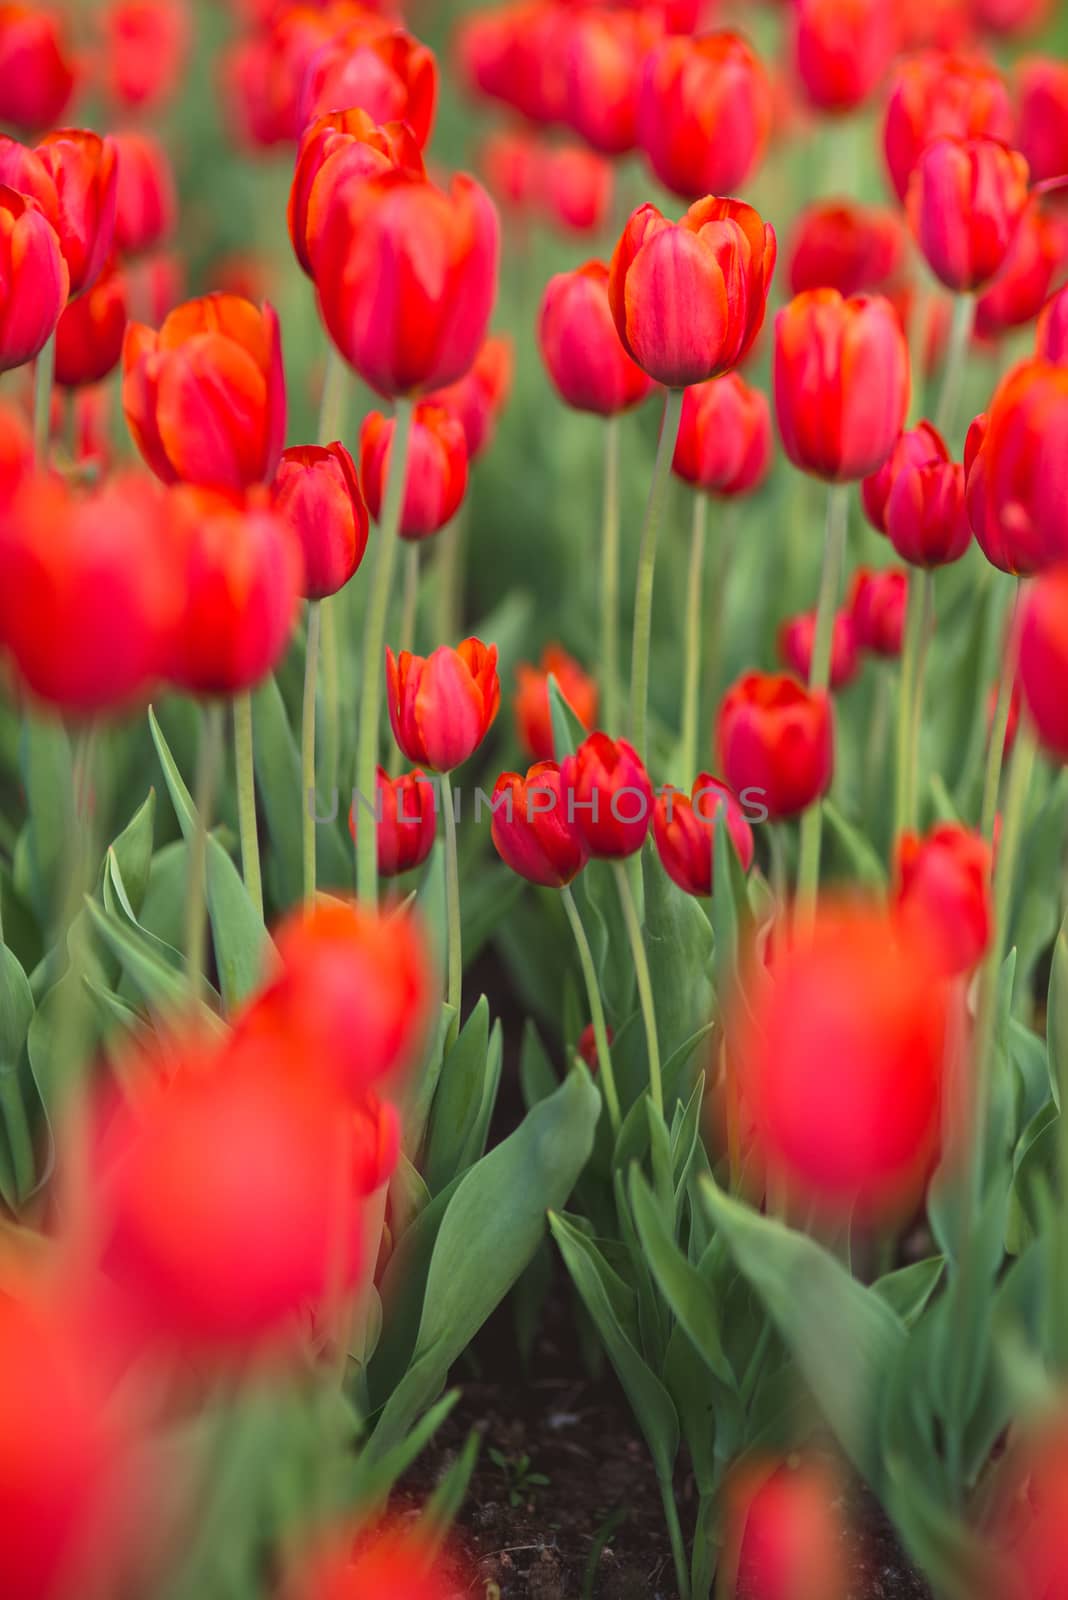 Group of red tulips in the park. Spring blurred background by skrotov